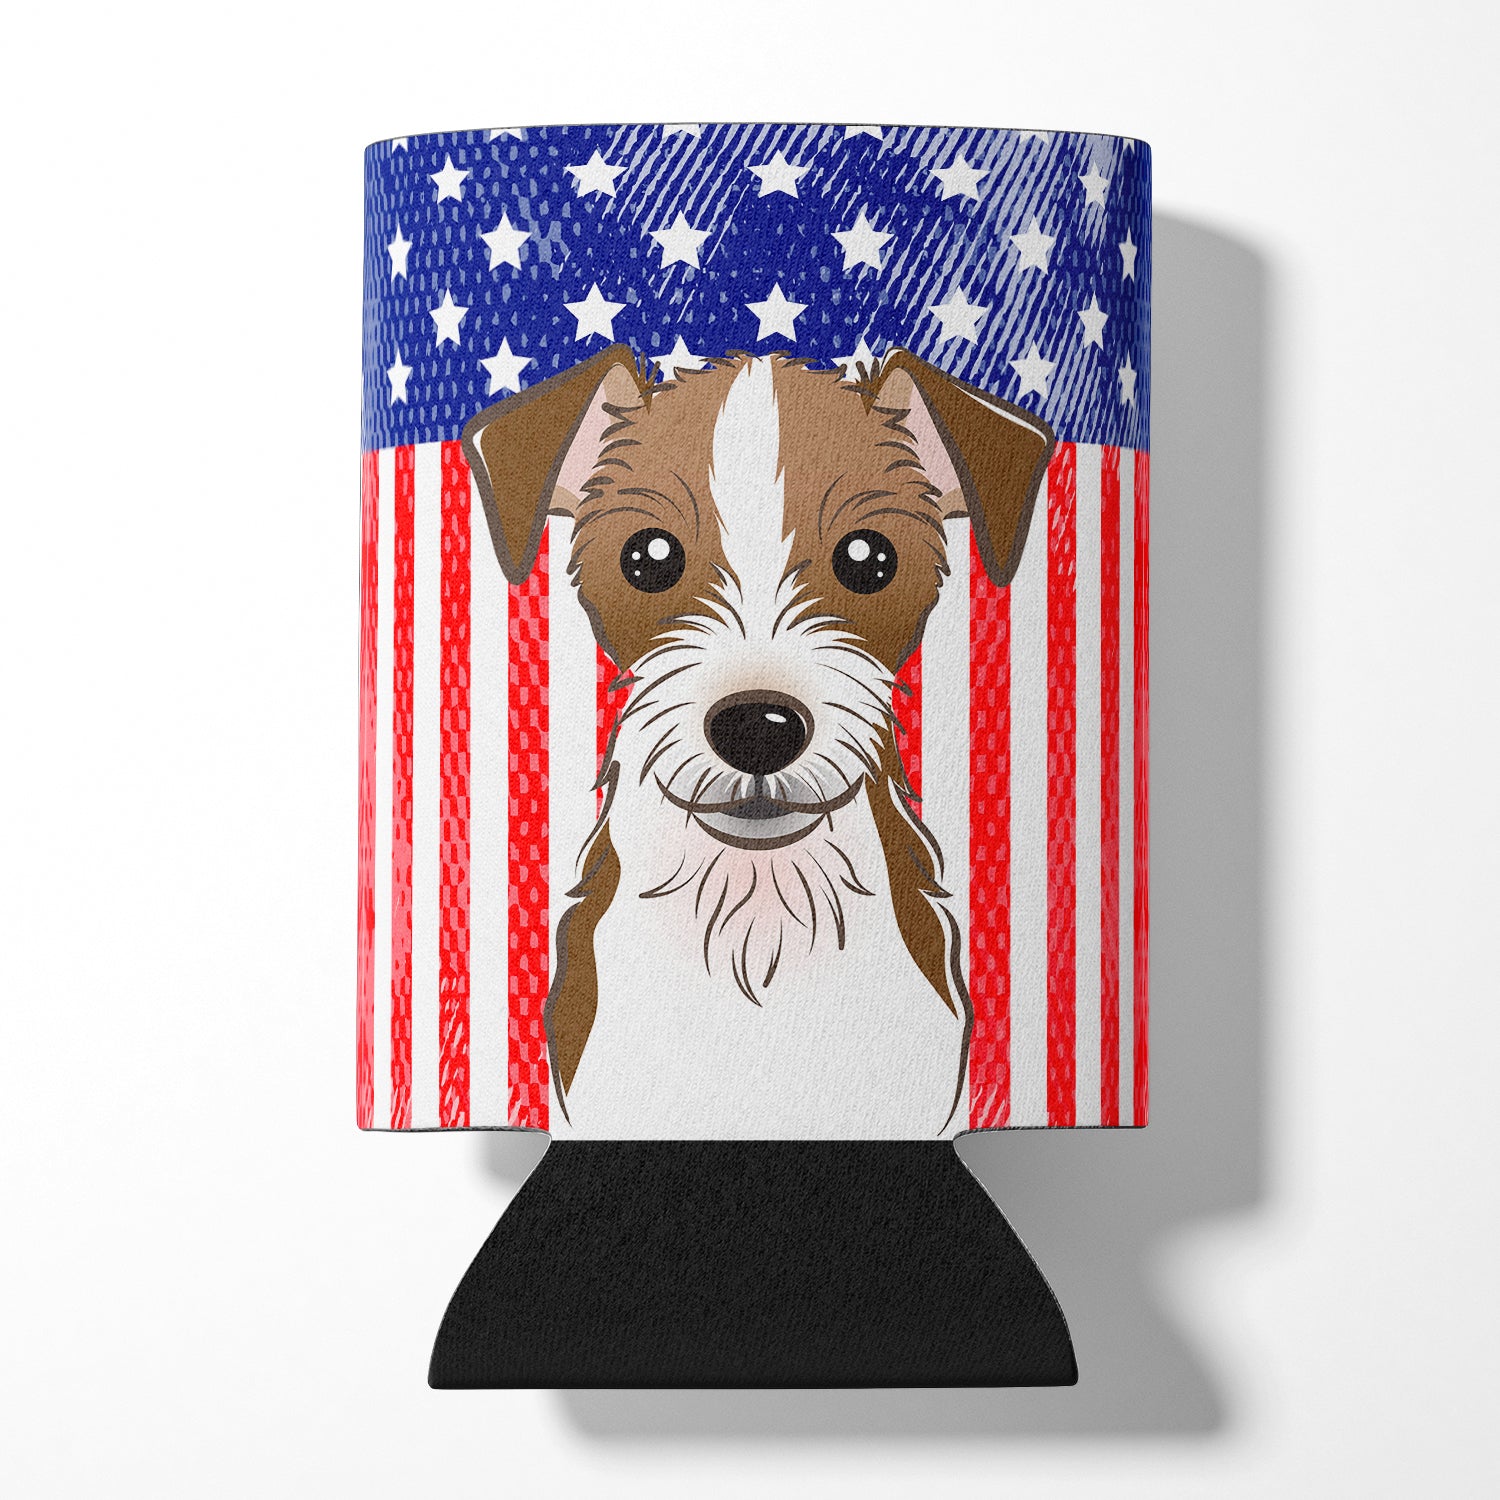 American Flag and Jack Russell Terrier Can or Bottle Hugger BB2132CC